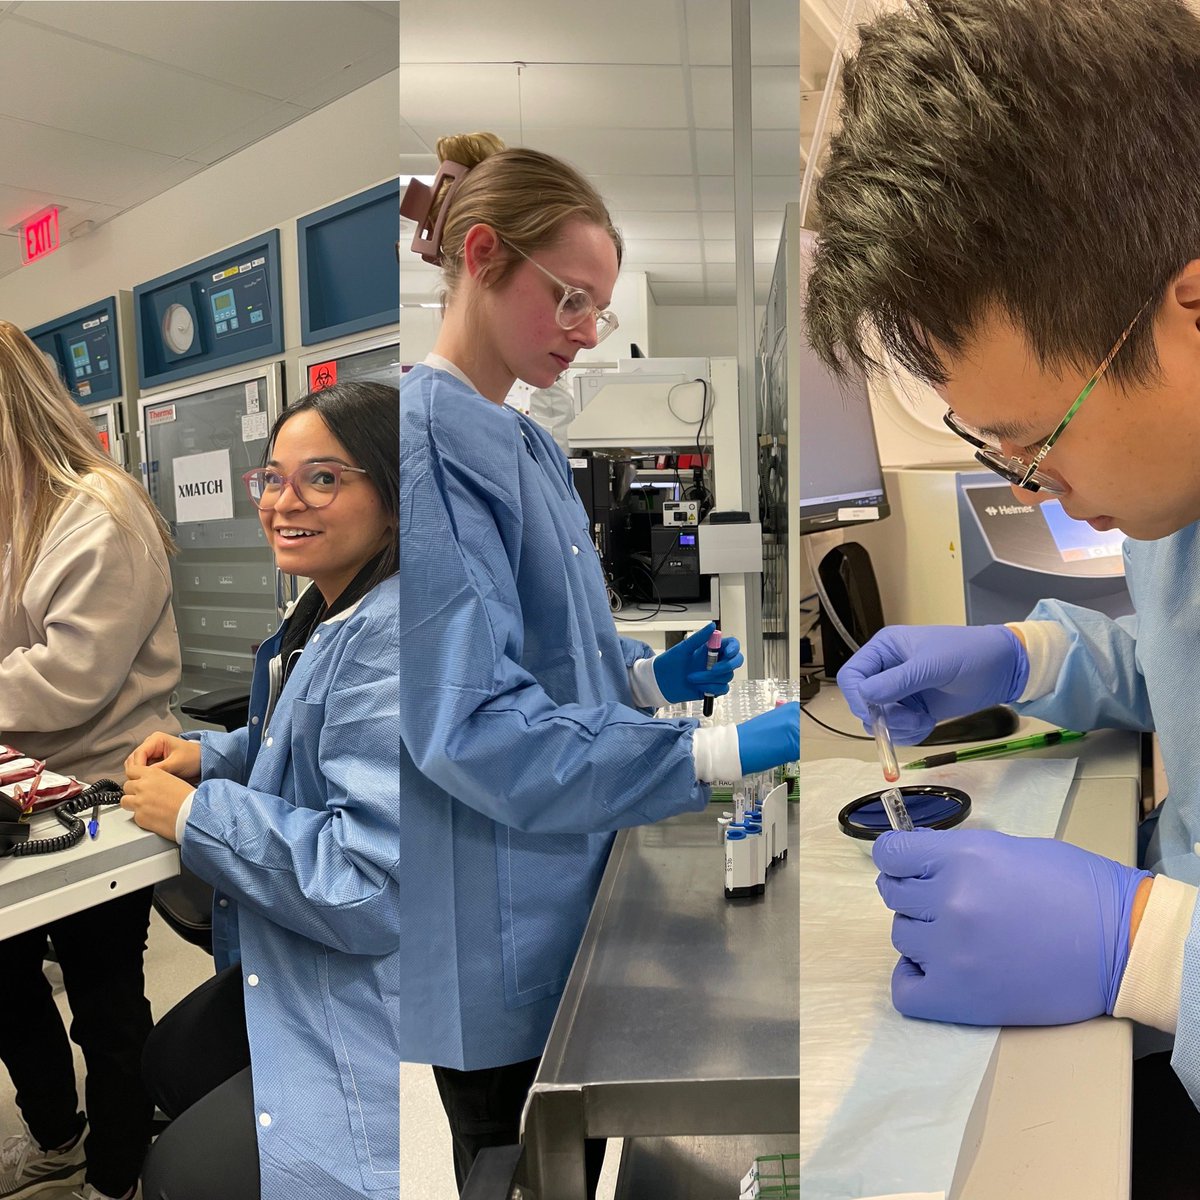 Solving puzzles and saving lives is all in a days work! Blood bank has unique challenges and requires unique minds to meet them. Urgency must be a balanced with calm and order at all times. Alejandra, Elizabeth, and Vince are trying it out! #bloodbank #labucate #lablife